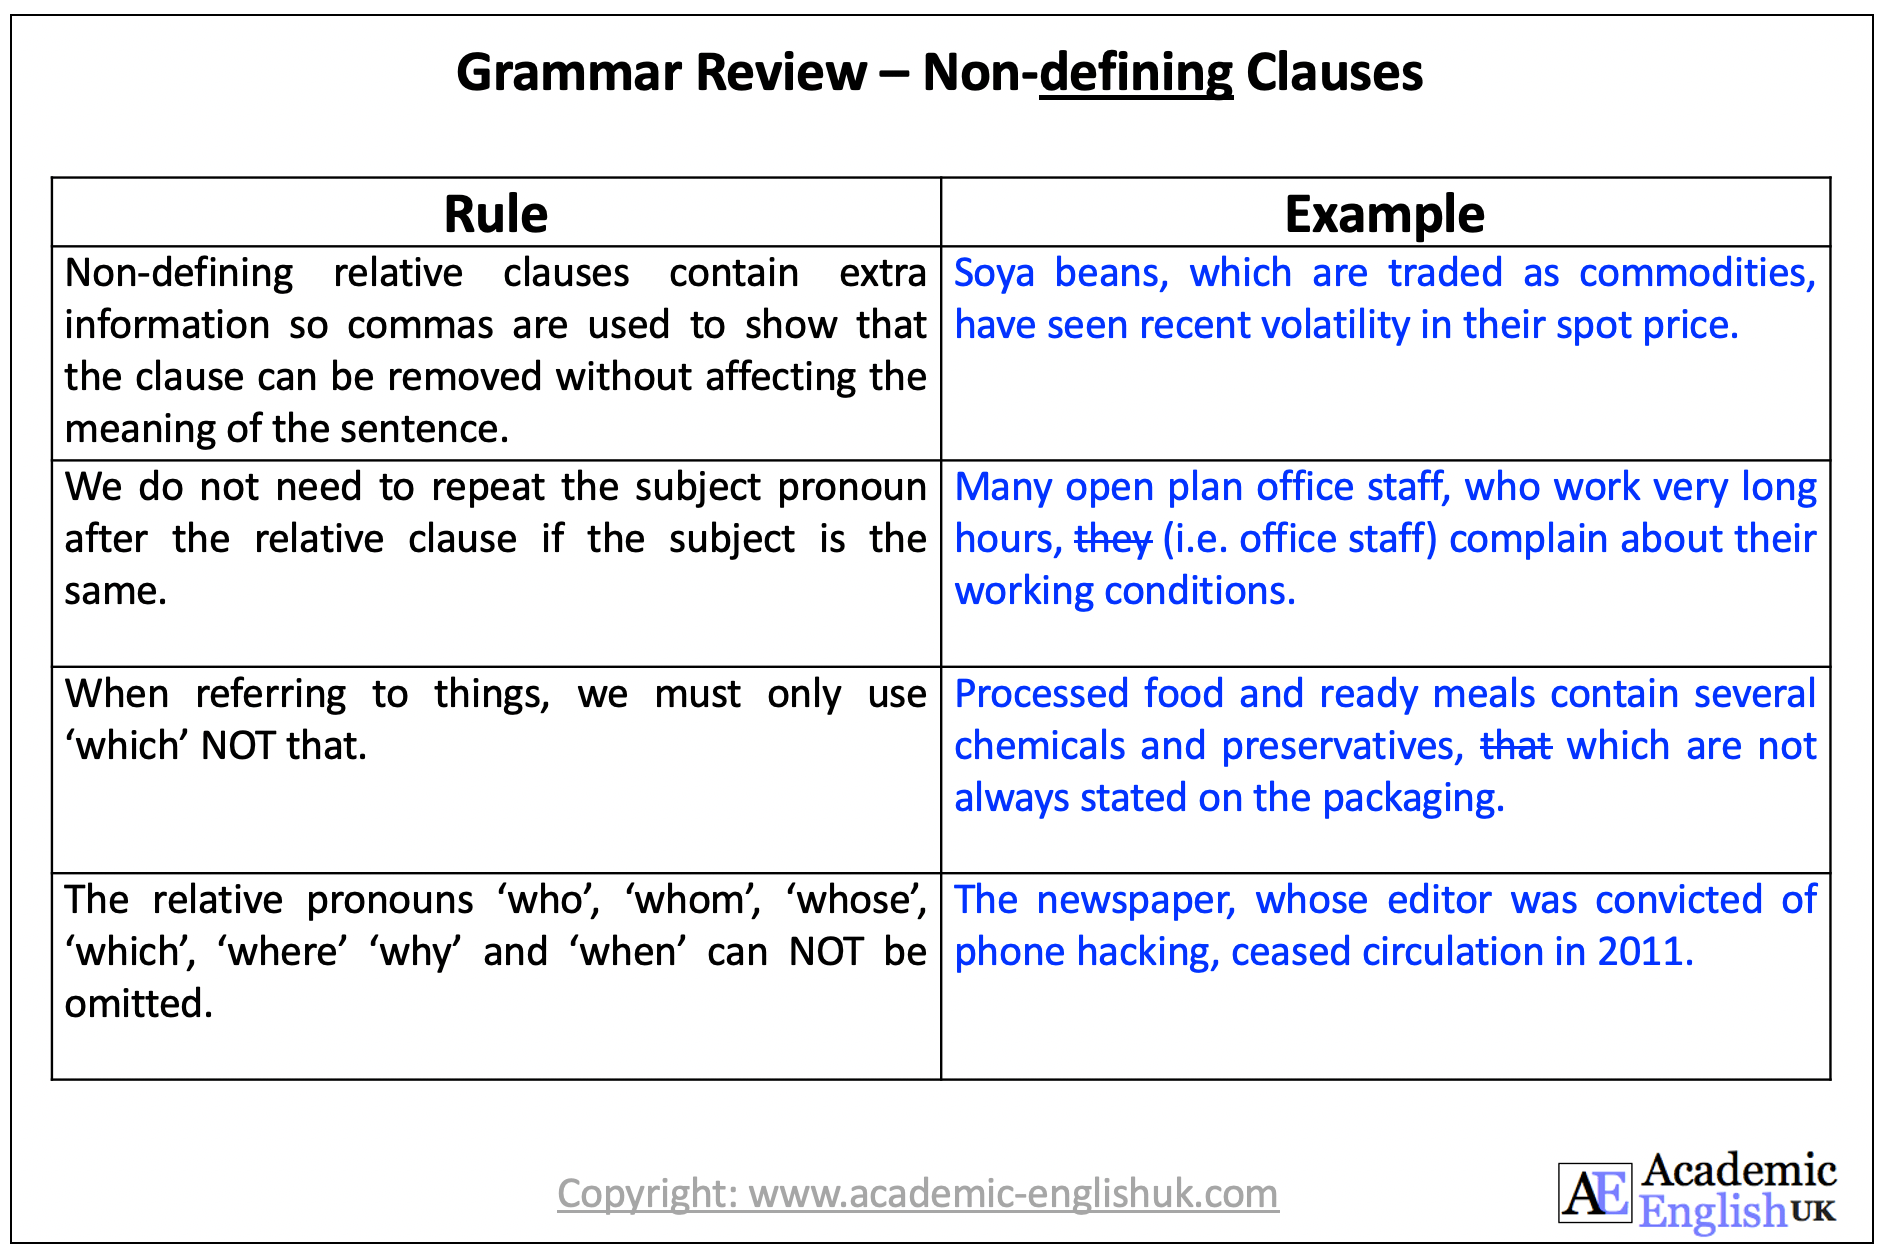 non-defining relative clauses